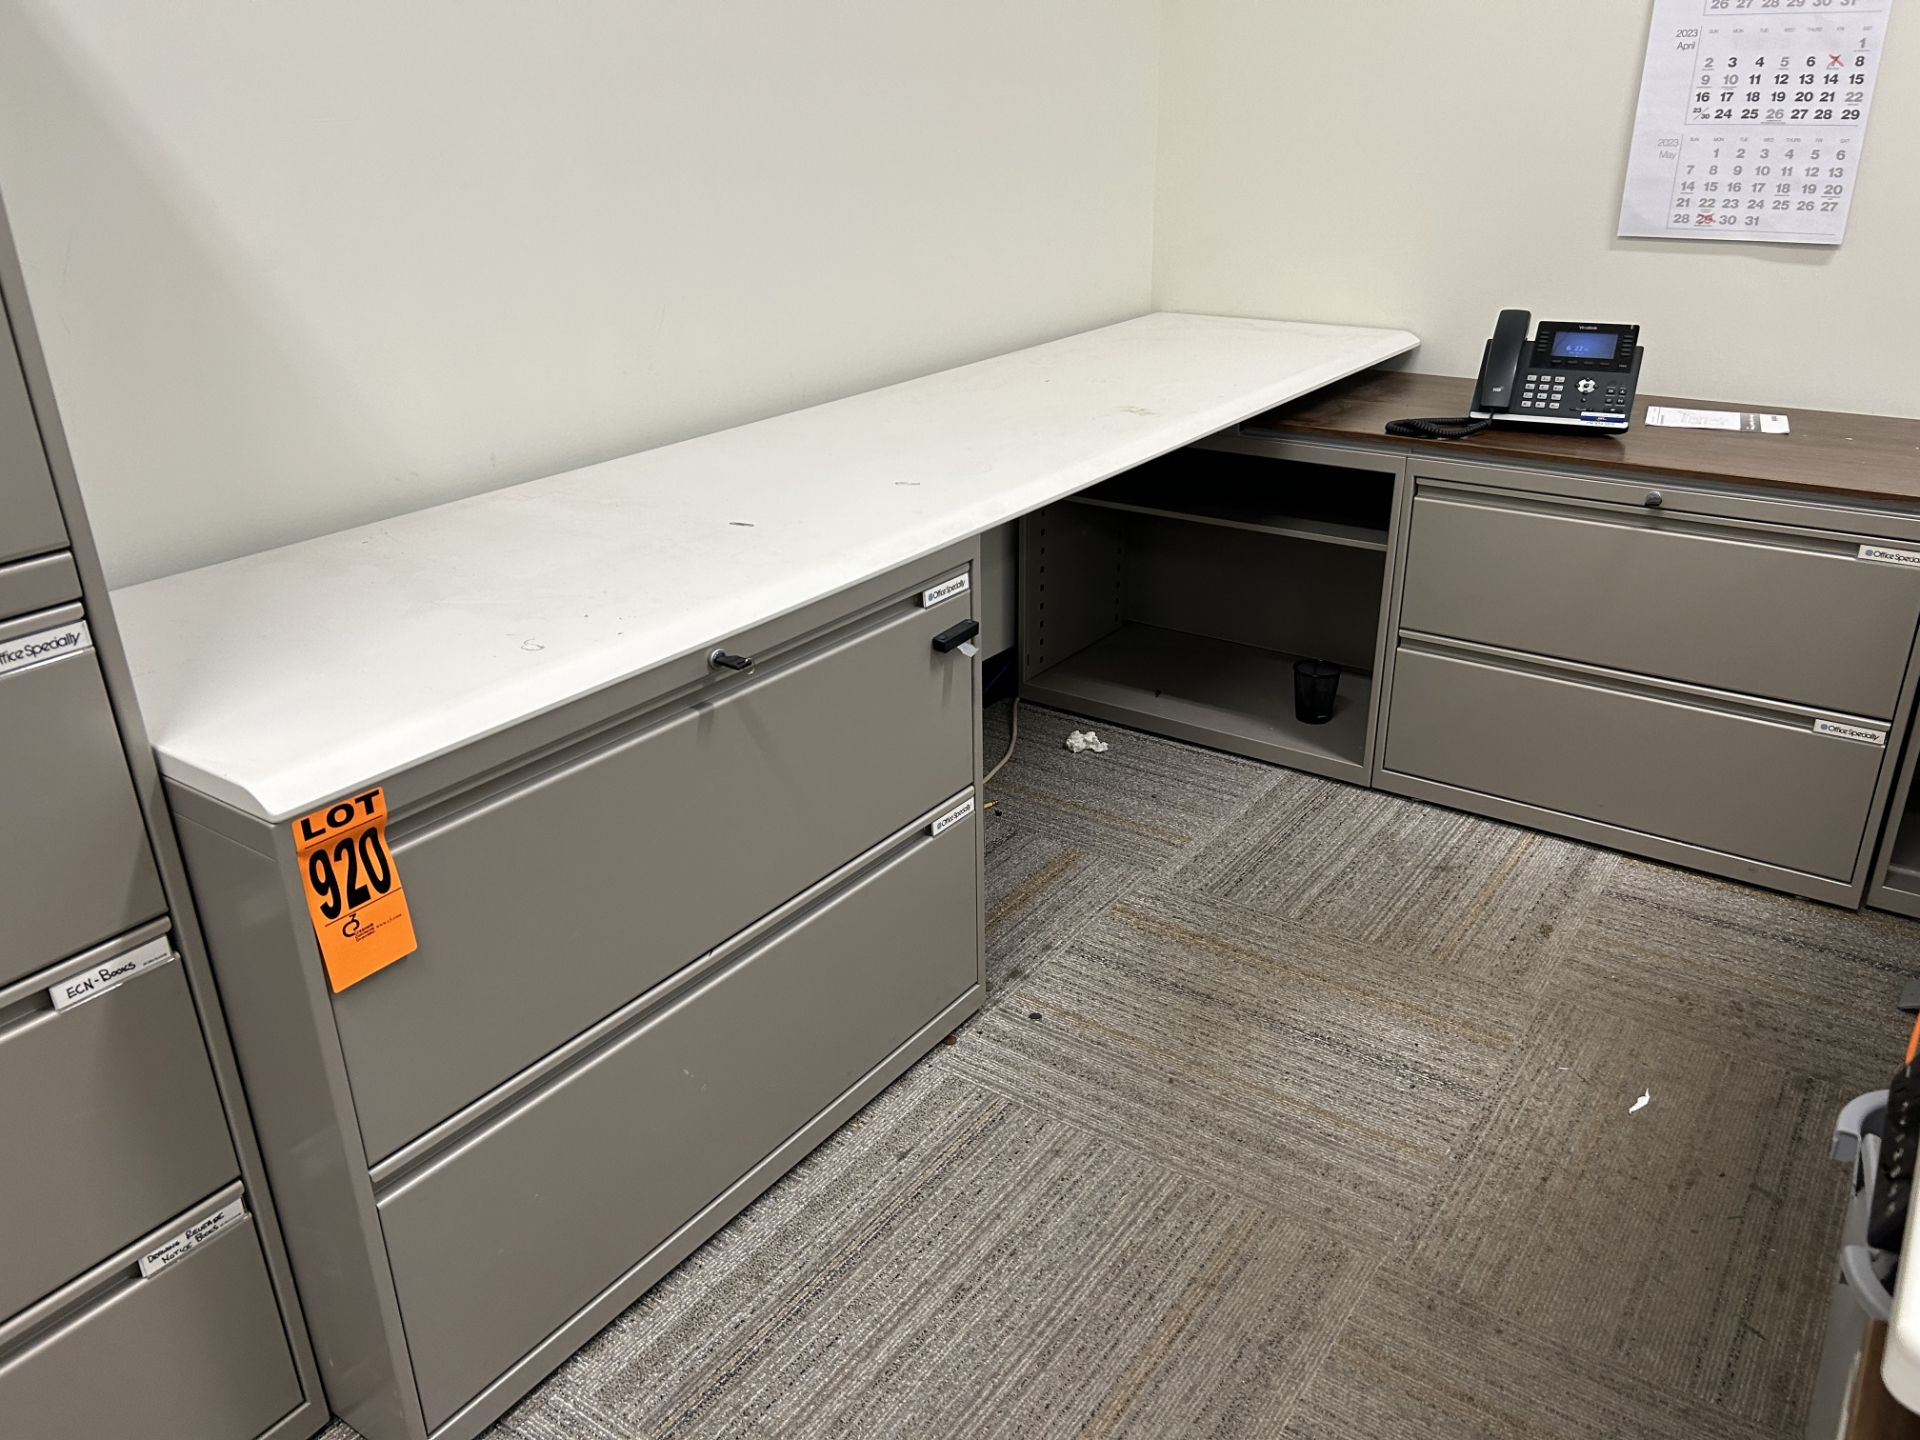 Lot of office furniture incl. (3) 2-level filing cabinets and work surfaces, L-shape